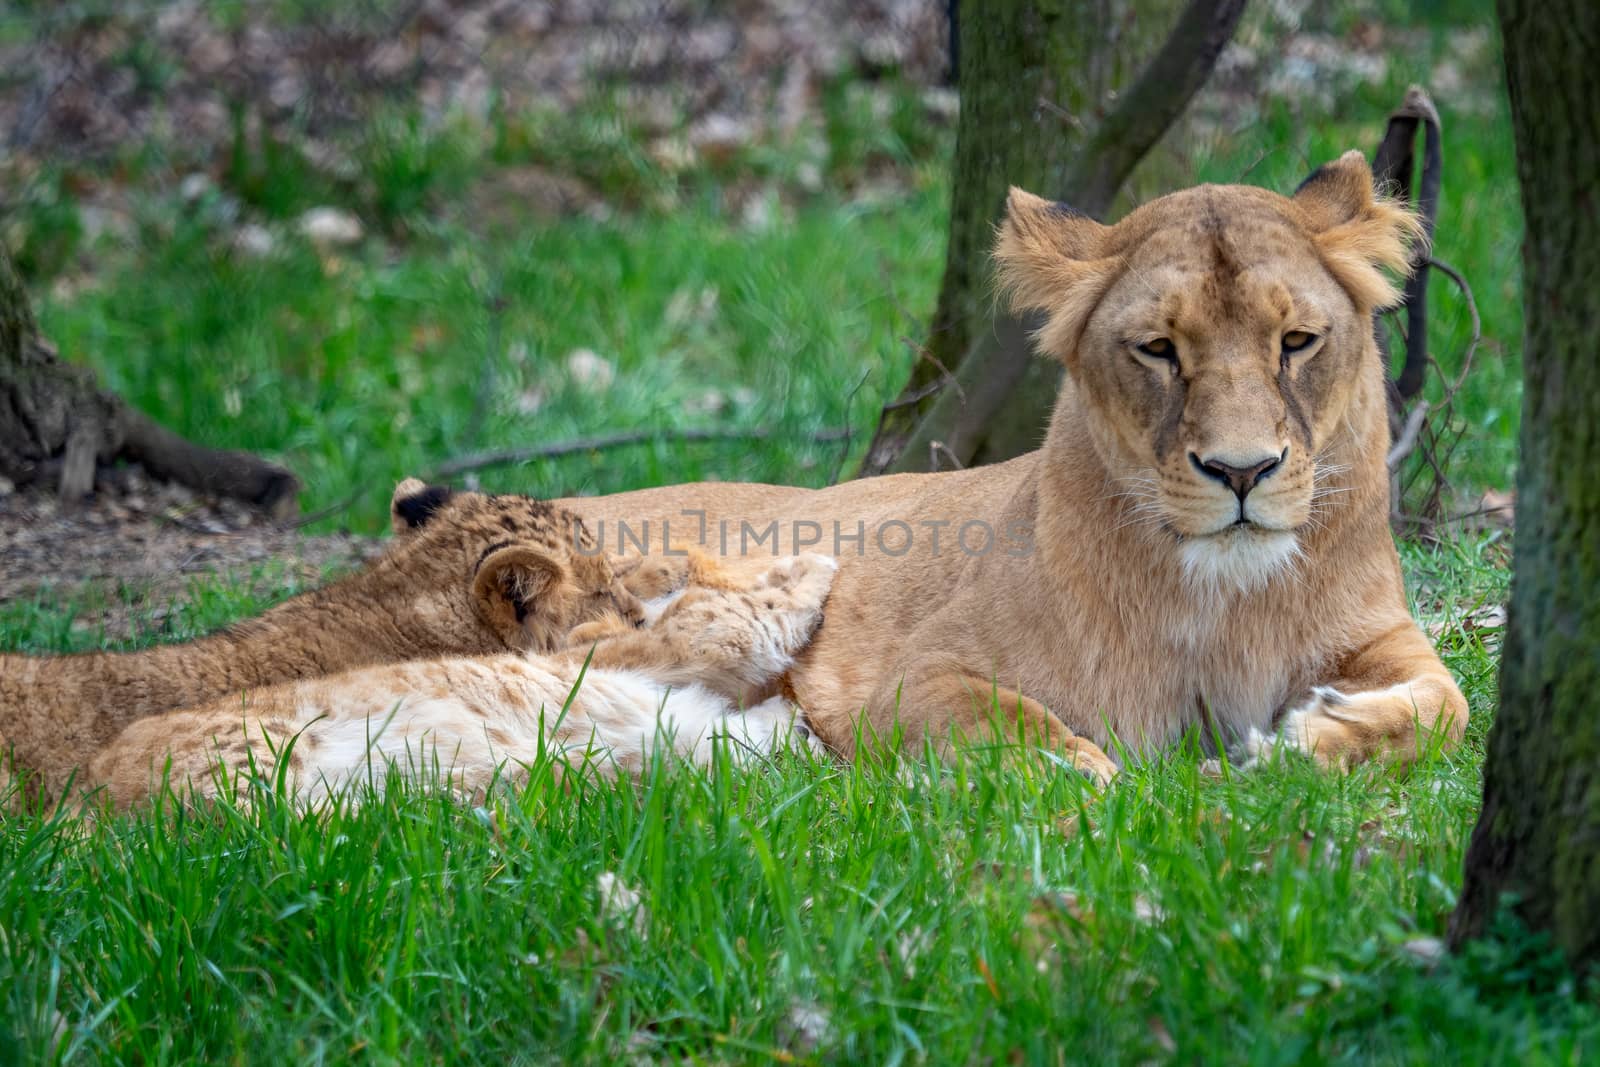 Lion mother with her young cubs. Congolese lion (Panthera leo bl by xtrekx